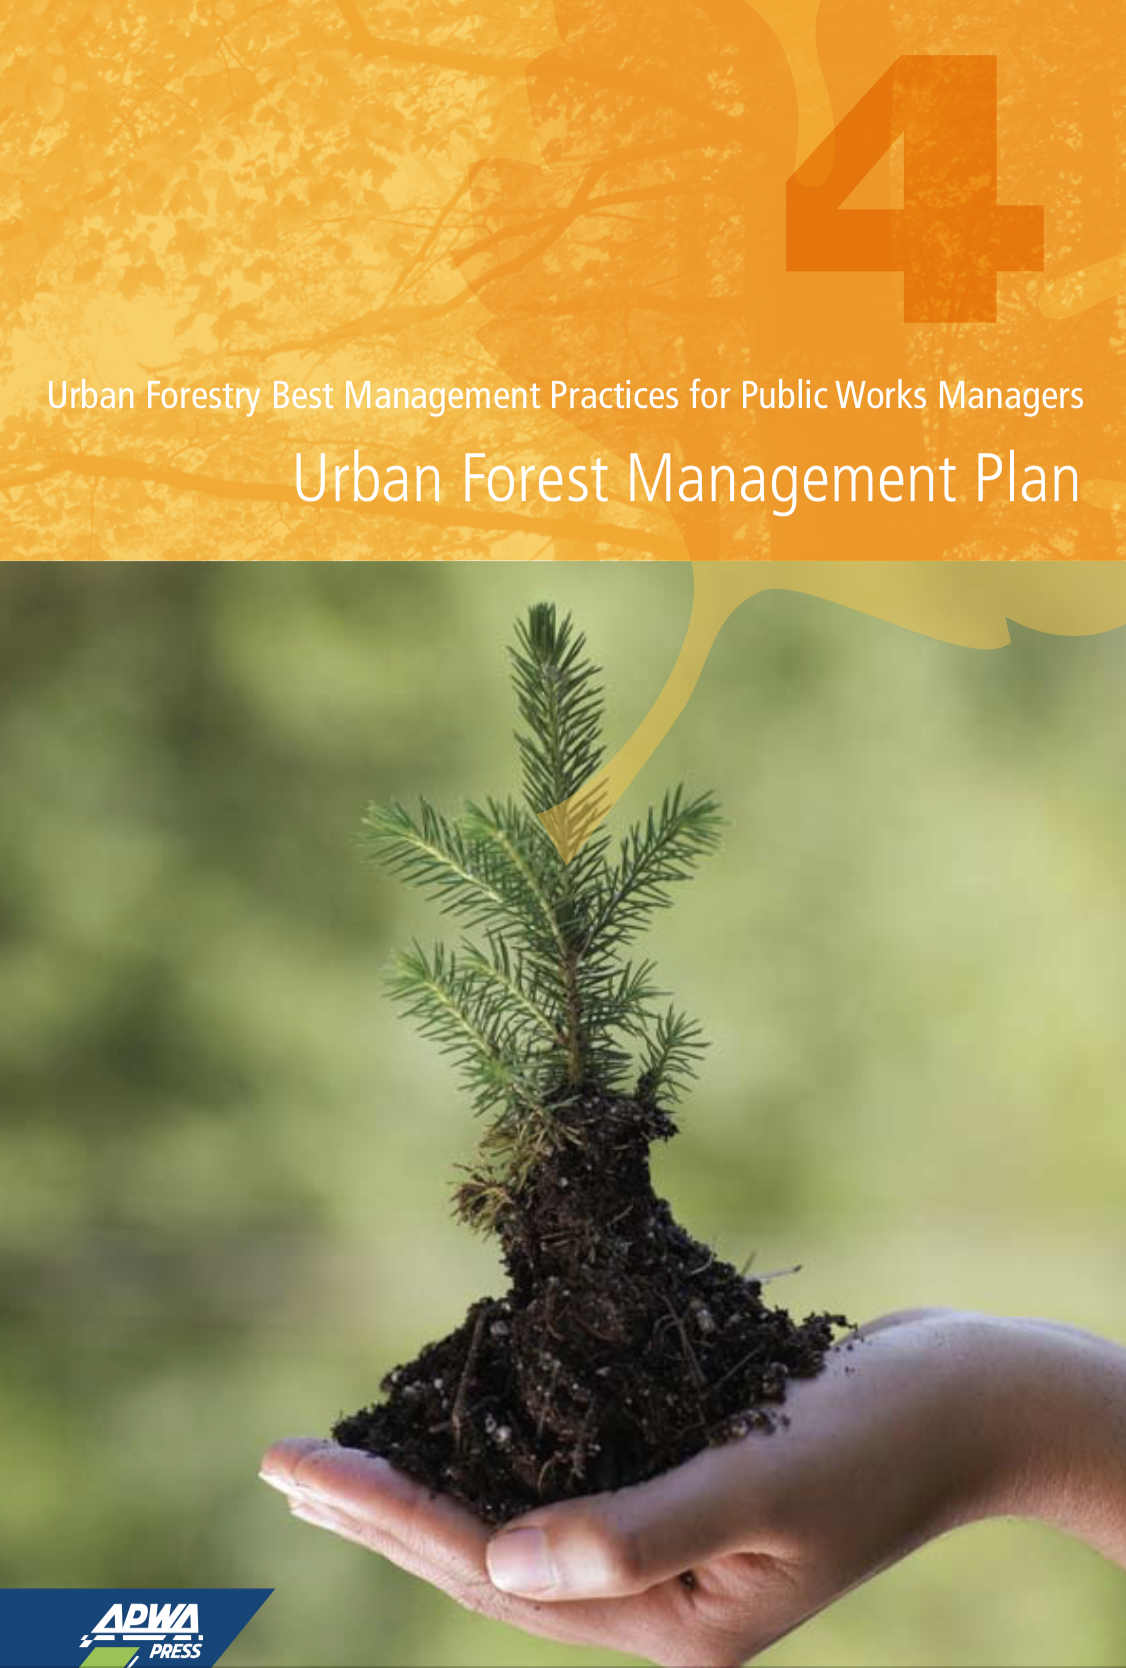 Urban Forestry Best Management Practices for Public Works Managers: Urban Forest Management Plan [PUB]